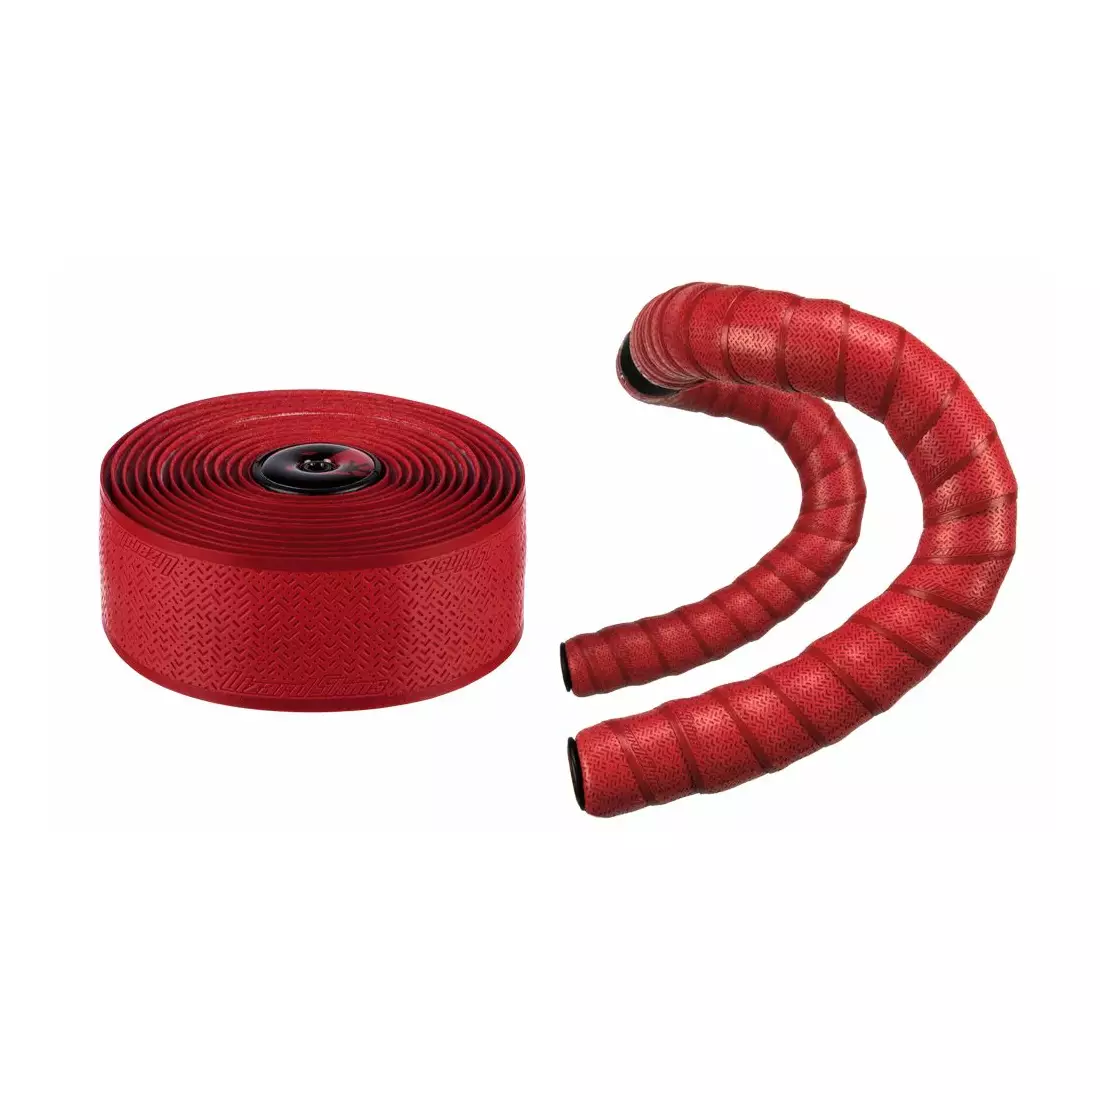 LIZARDSKINS bicycle handlebar wrap dsp 1.8 race bar tape 1,8mm crimson red LZS-DSPCY150